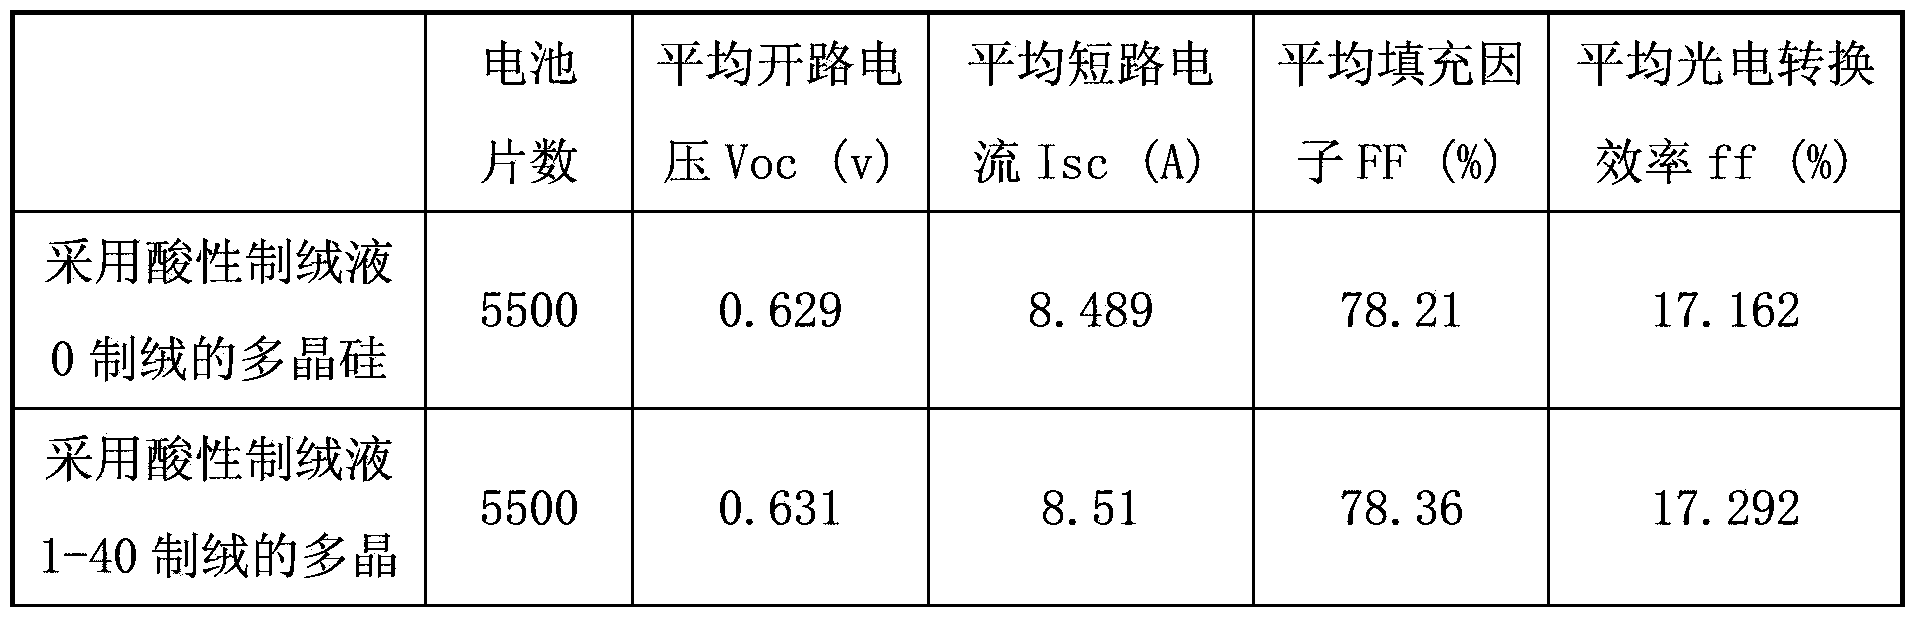 Auxiliary chemical composition for monocrystalline silicon or polycrystalline silicon acidic wool making